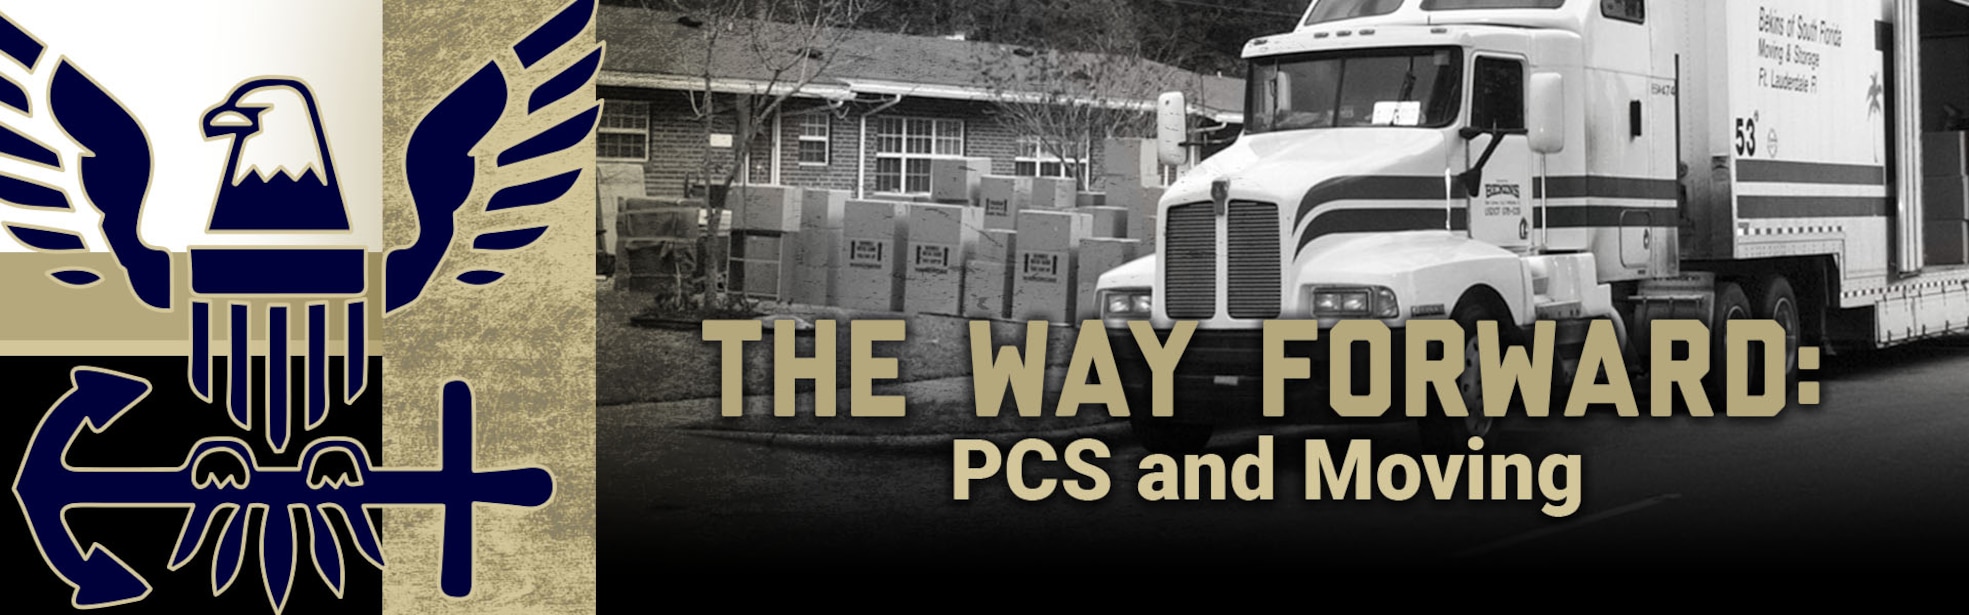 Banner showing navy logo and moving truck in black and white with titled The Way Forward: PCS and Moving